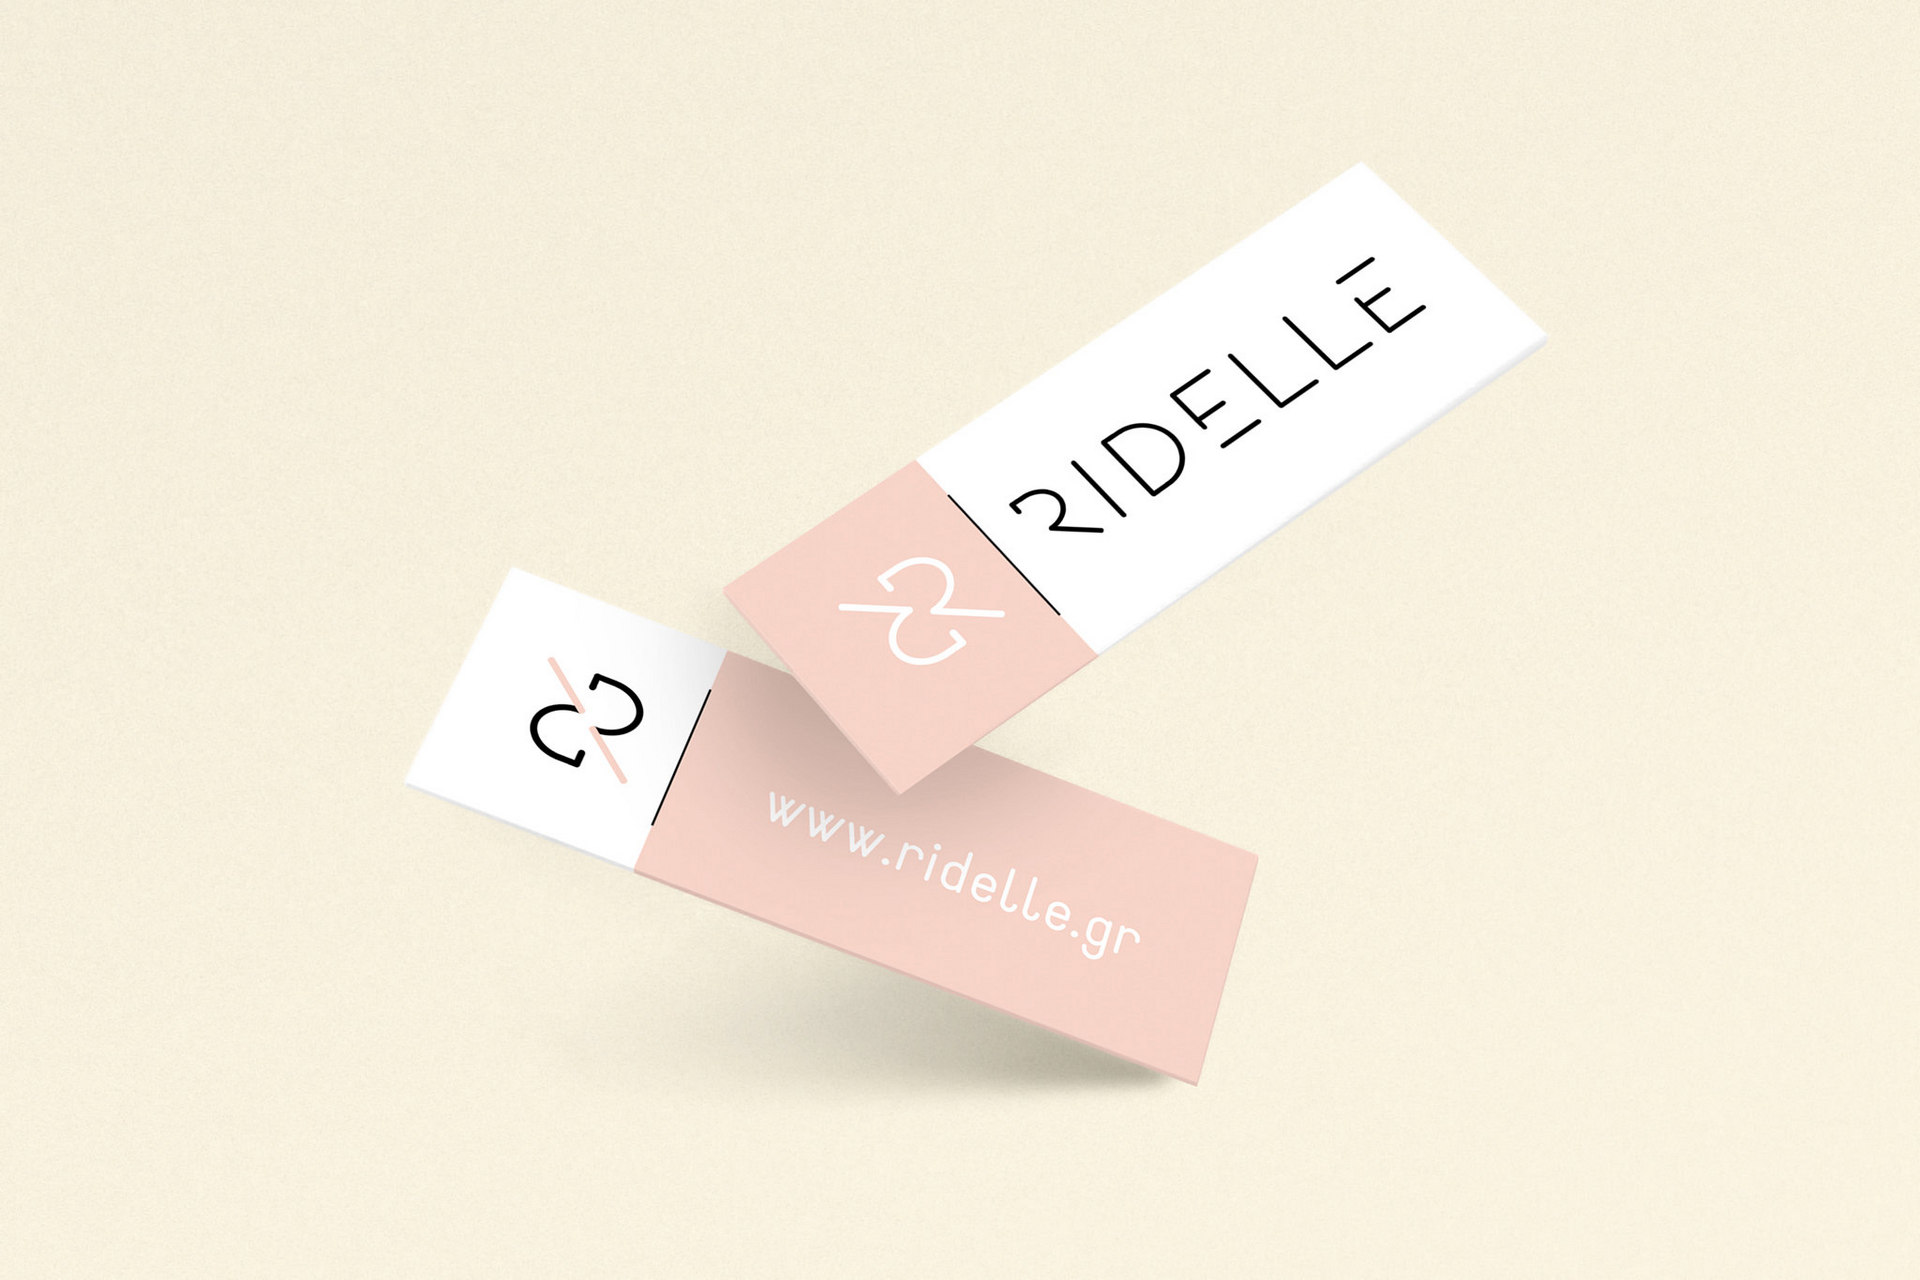 Ridelle business cards design